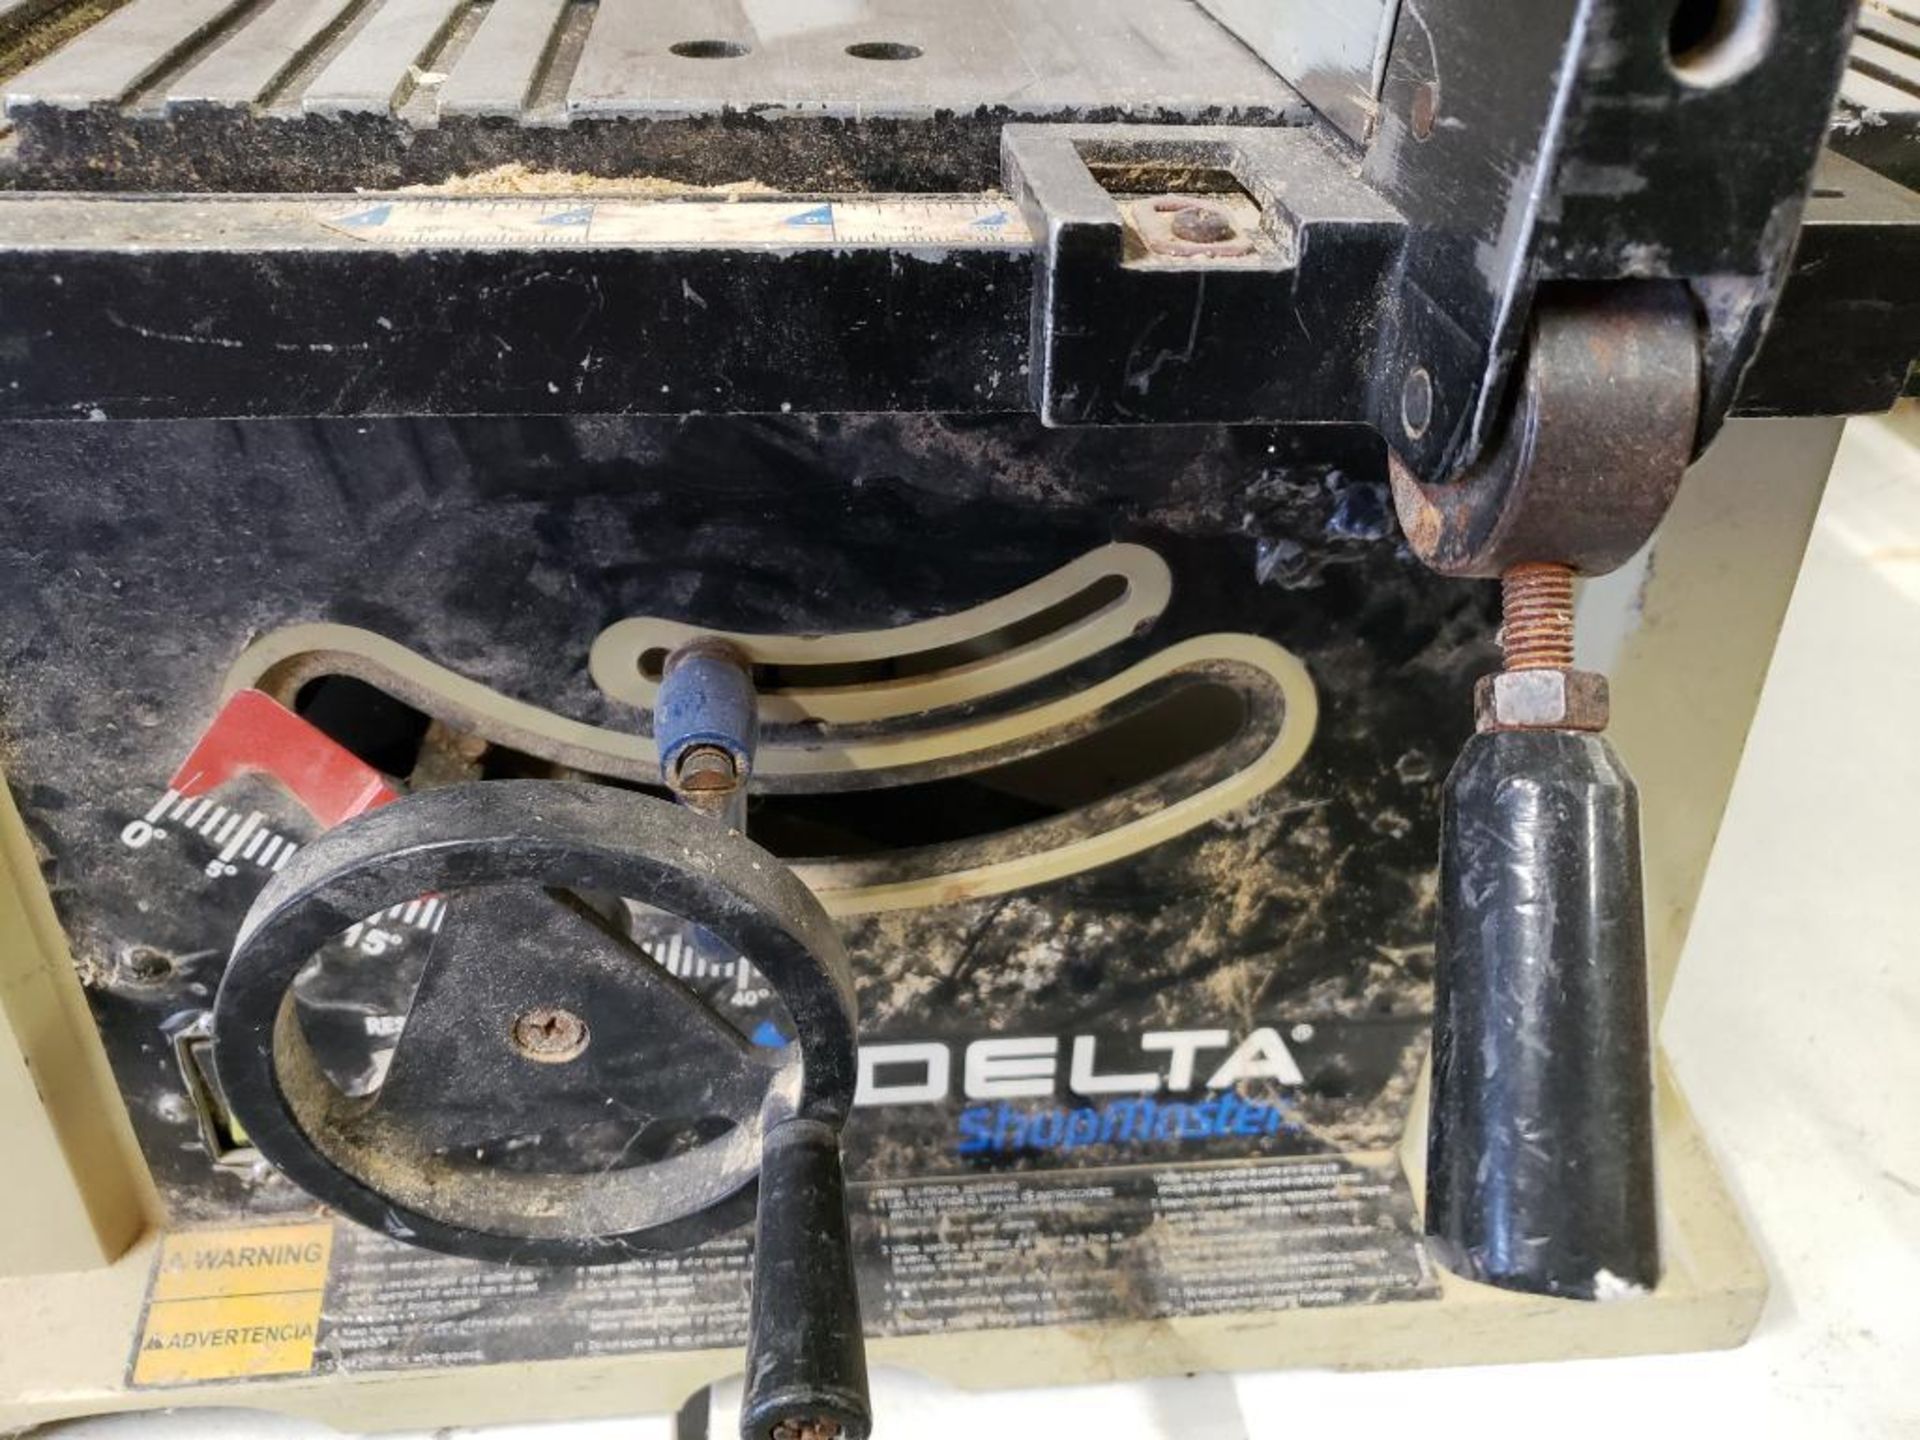 Delta Shopmaster table saw. 10in blade. Model TS200LS. 120v single phase. - Image 4 of 11